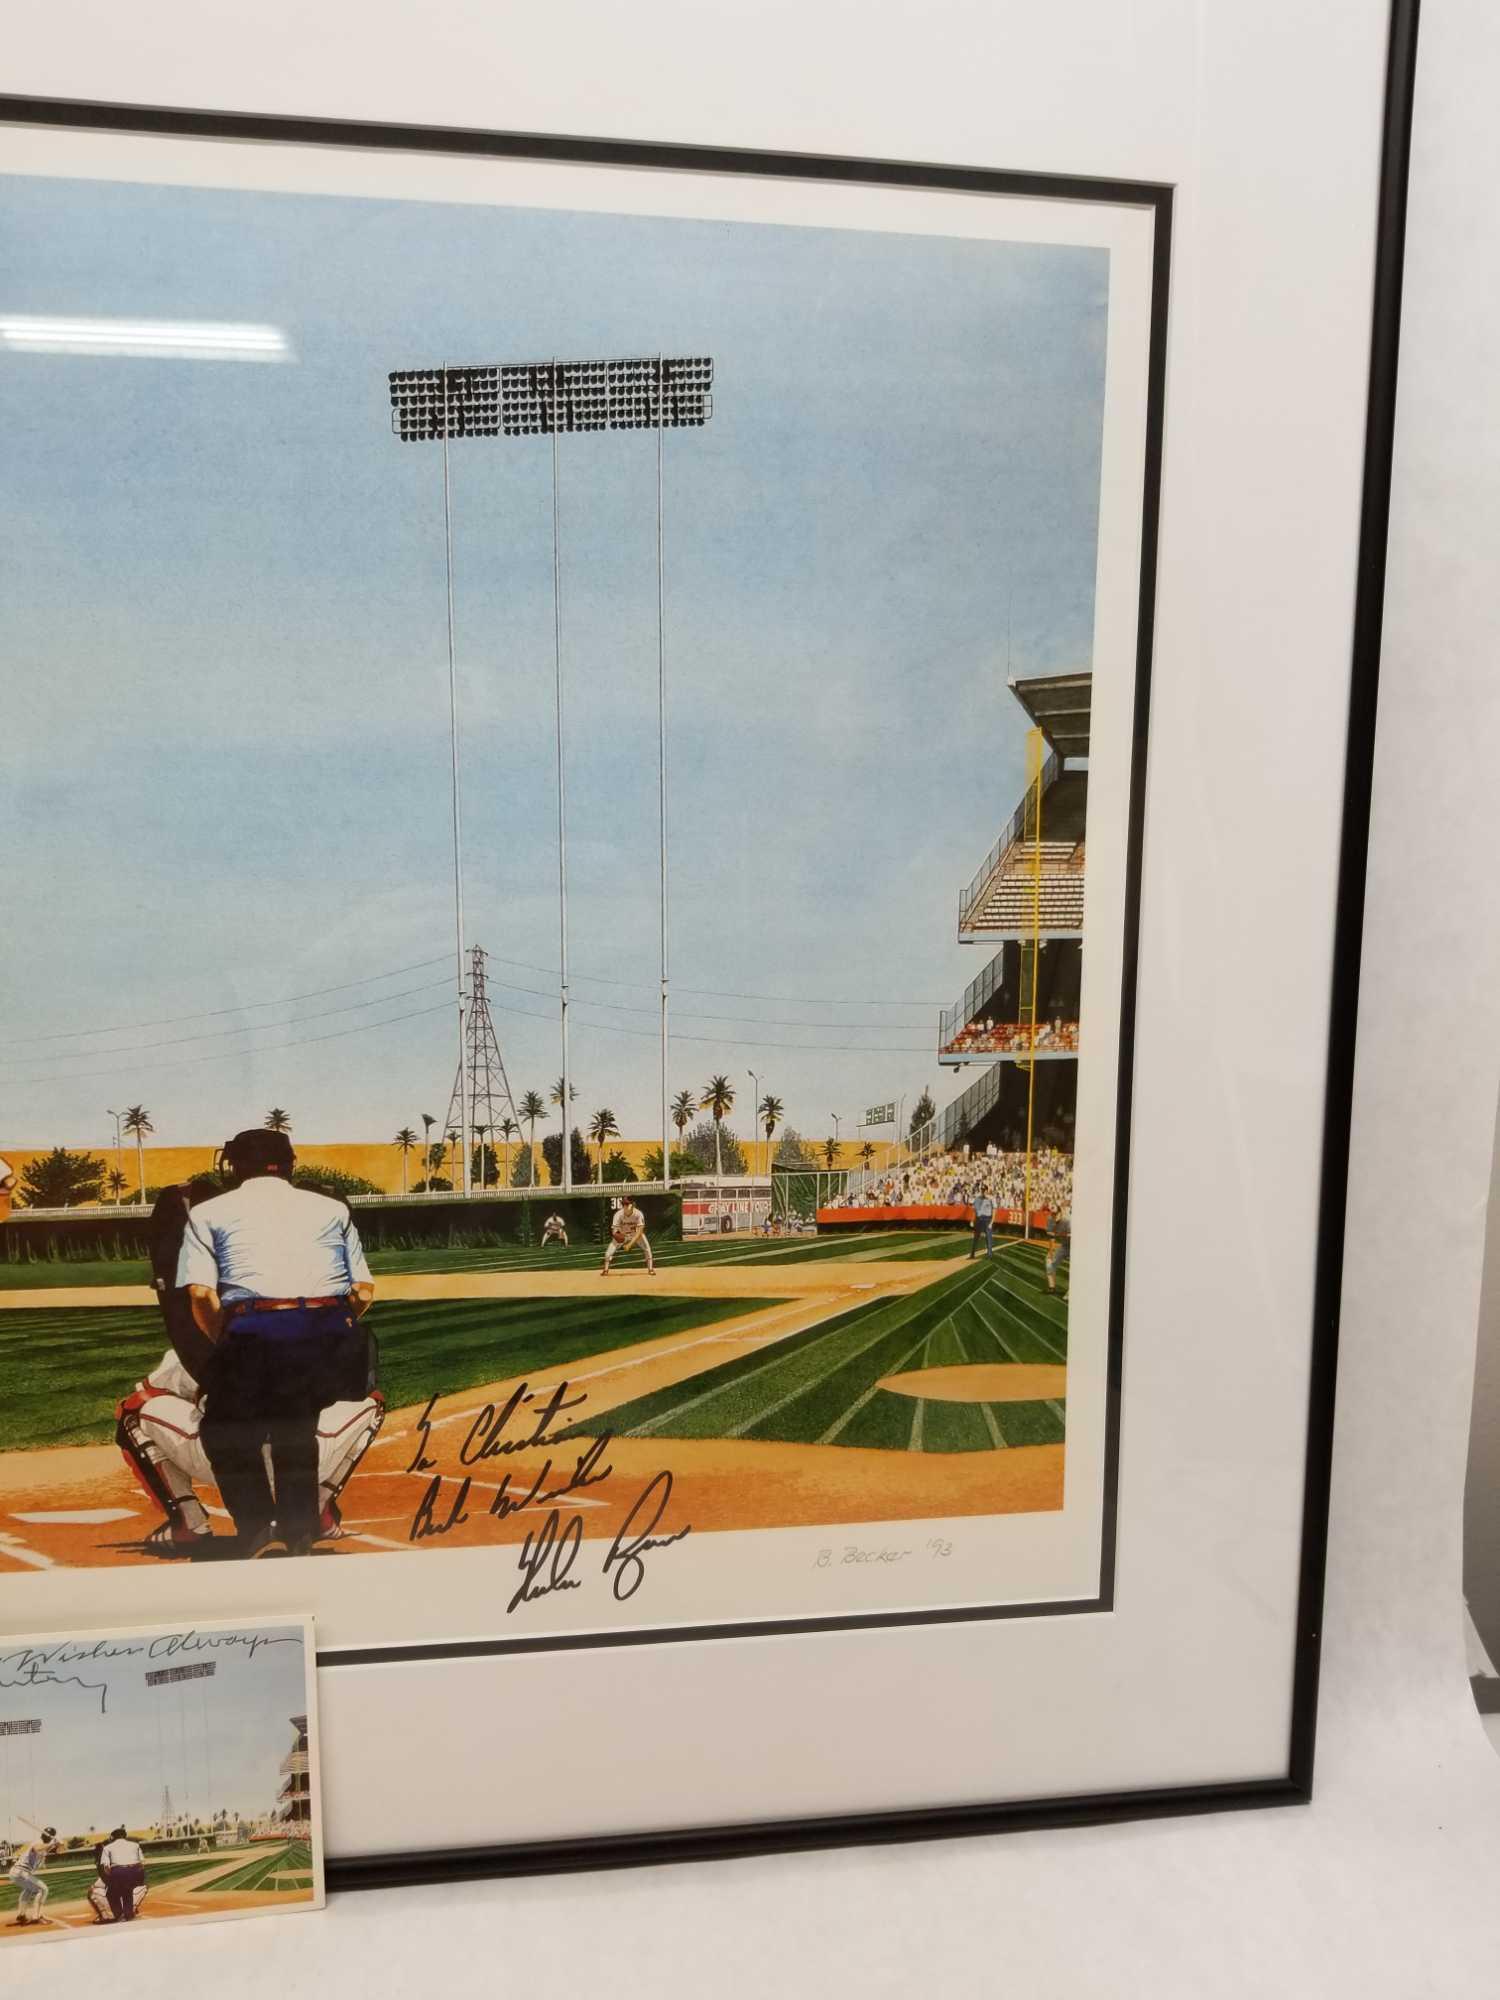 Certified Framed Litho Signed by Gene Autrey and Nolan Ryan.